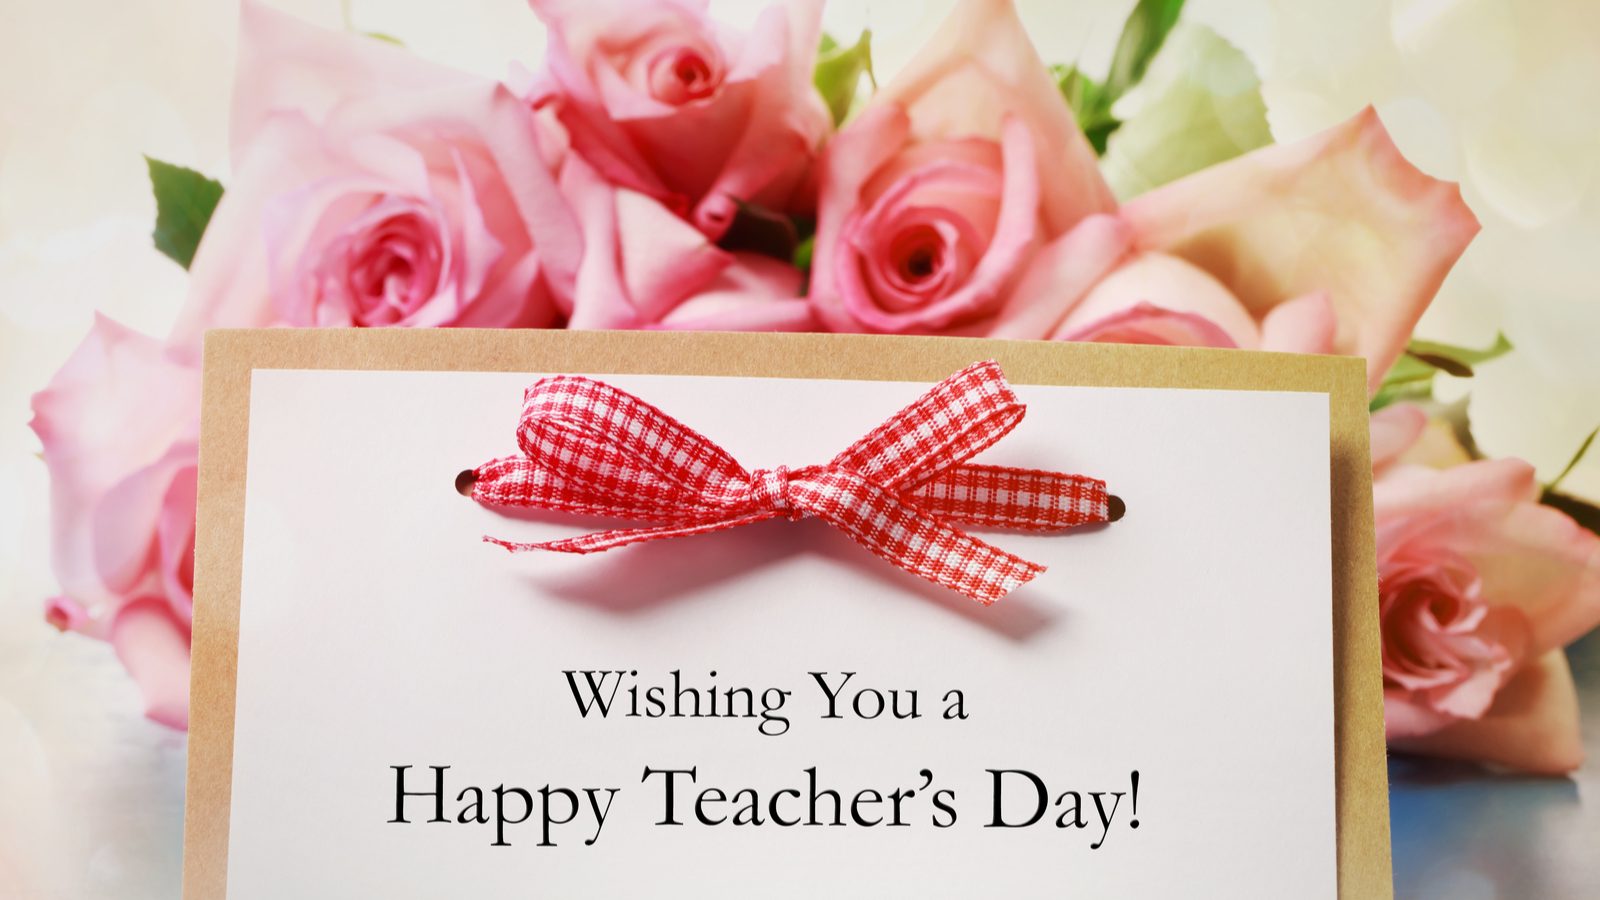 Teachers' Day 2021: Surprise Your Teacher with These Amazing Gift ...